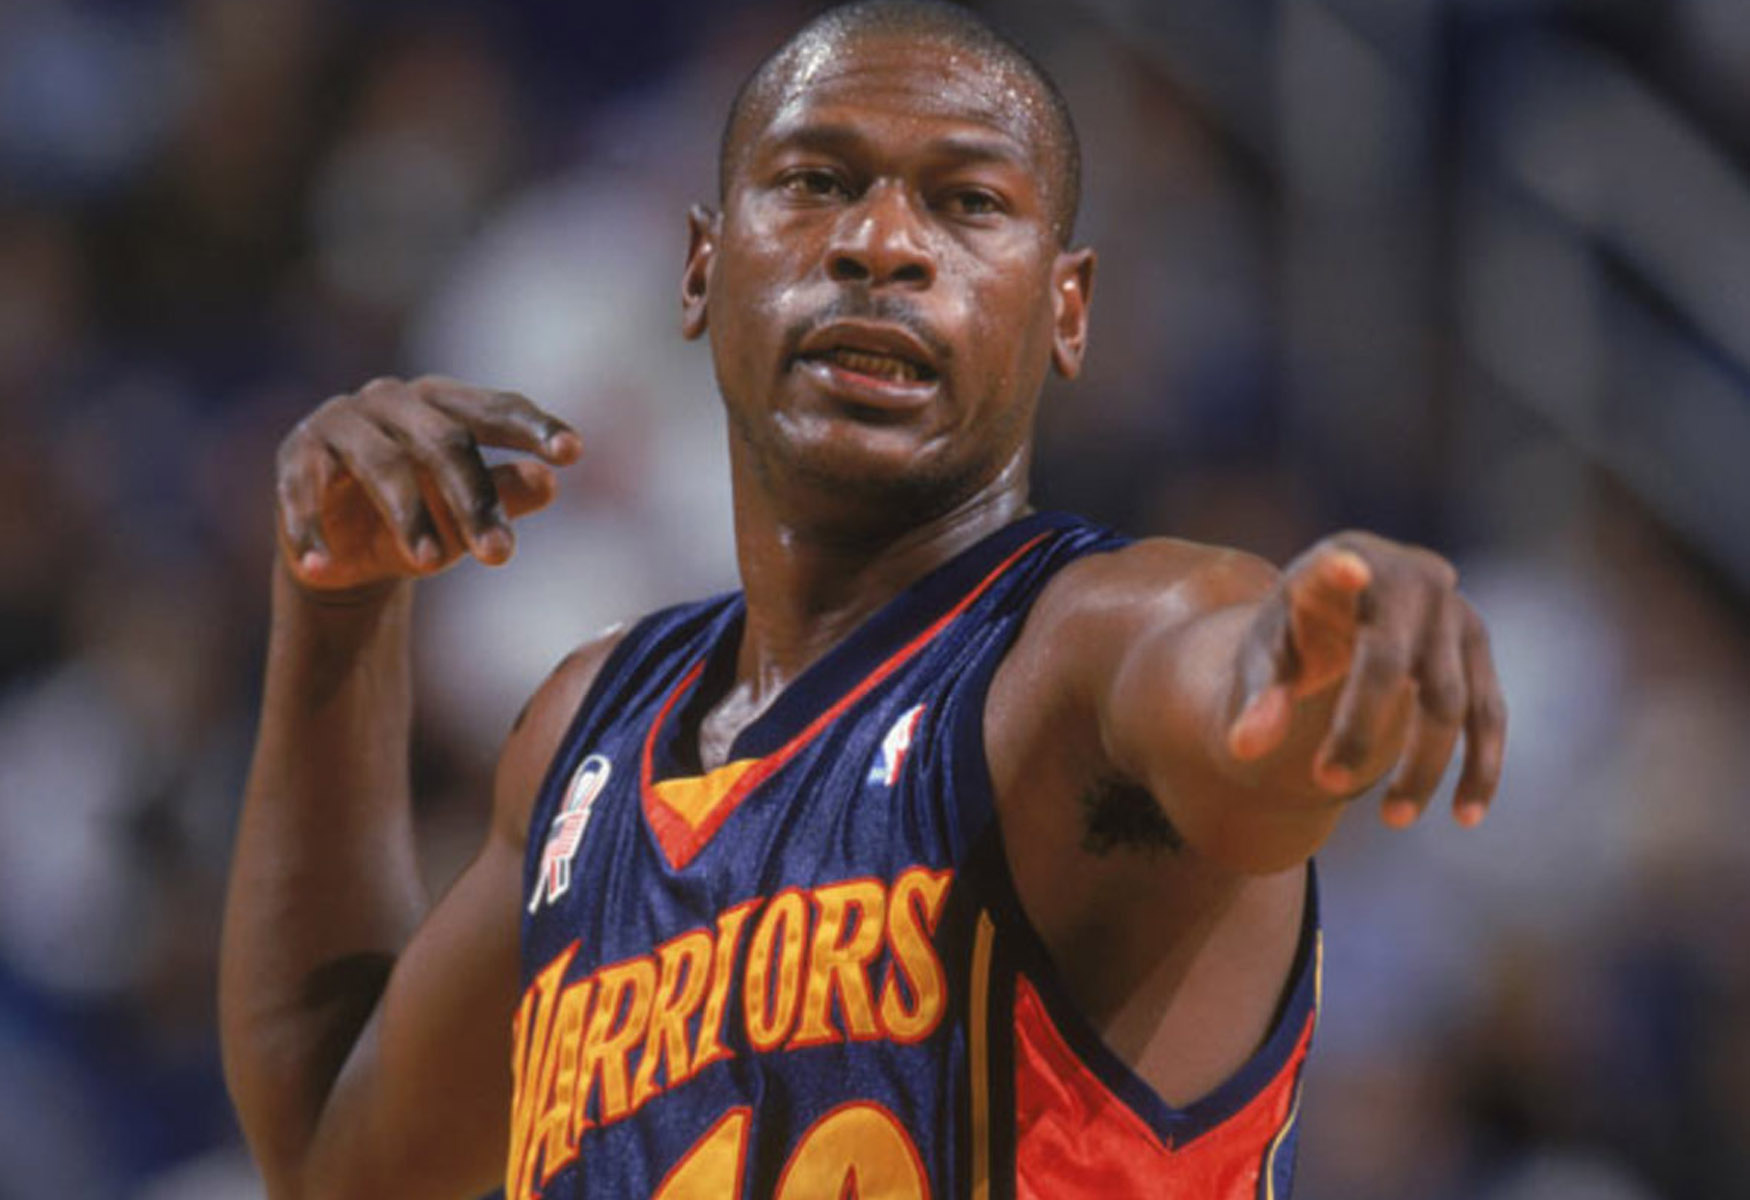 Not in Hall of Fame - 92. Mookie Blaylock